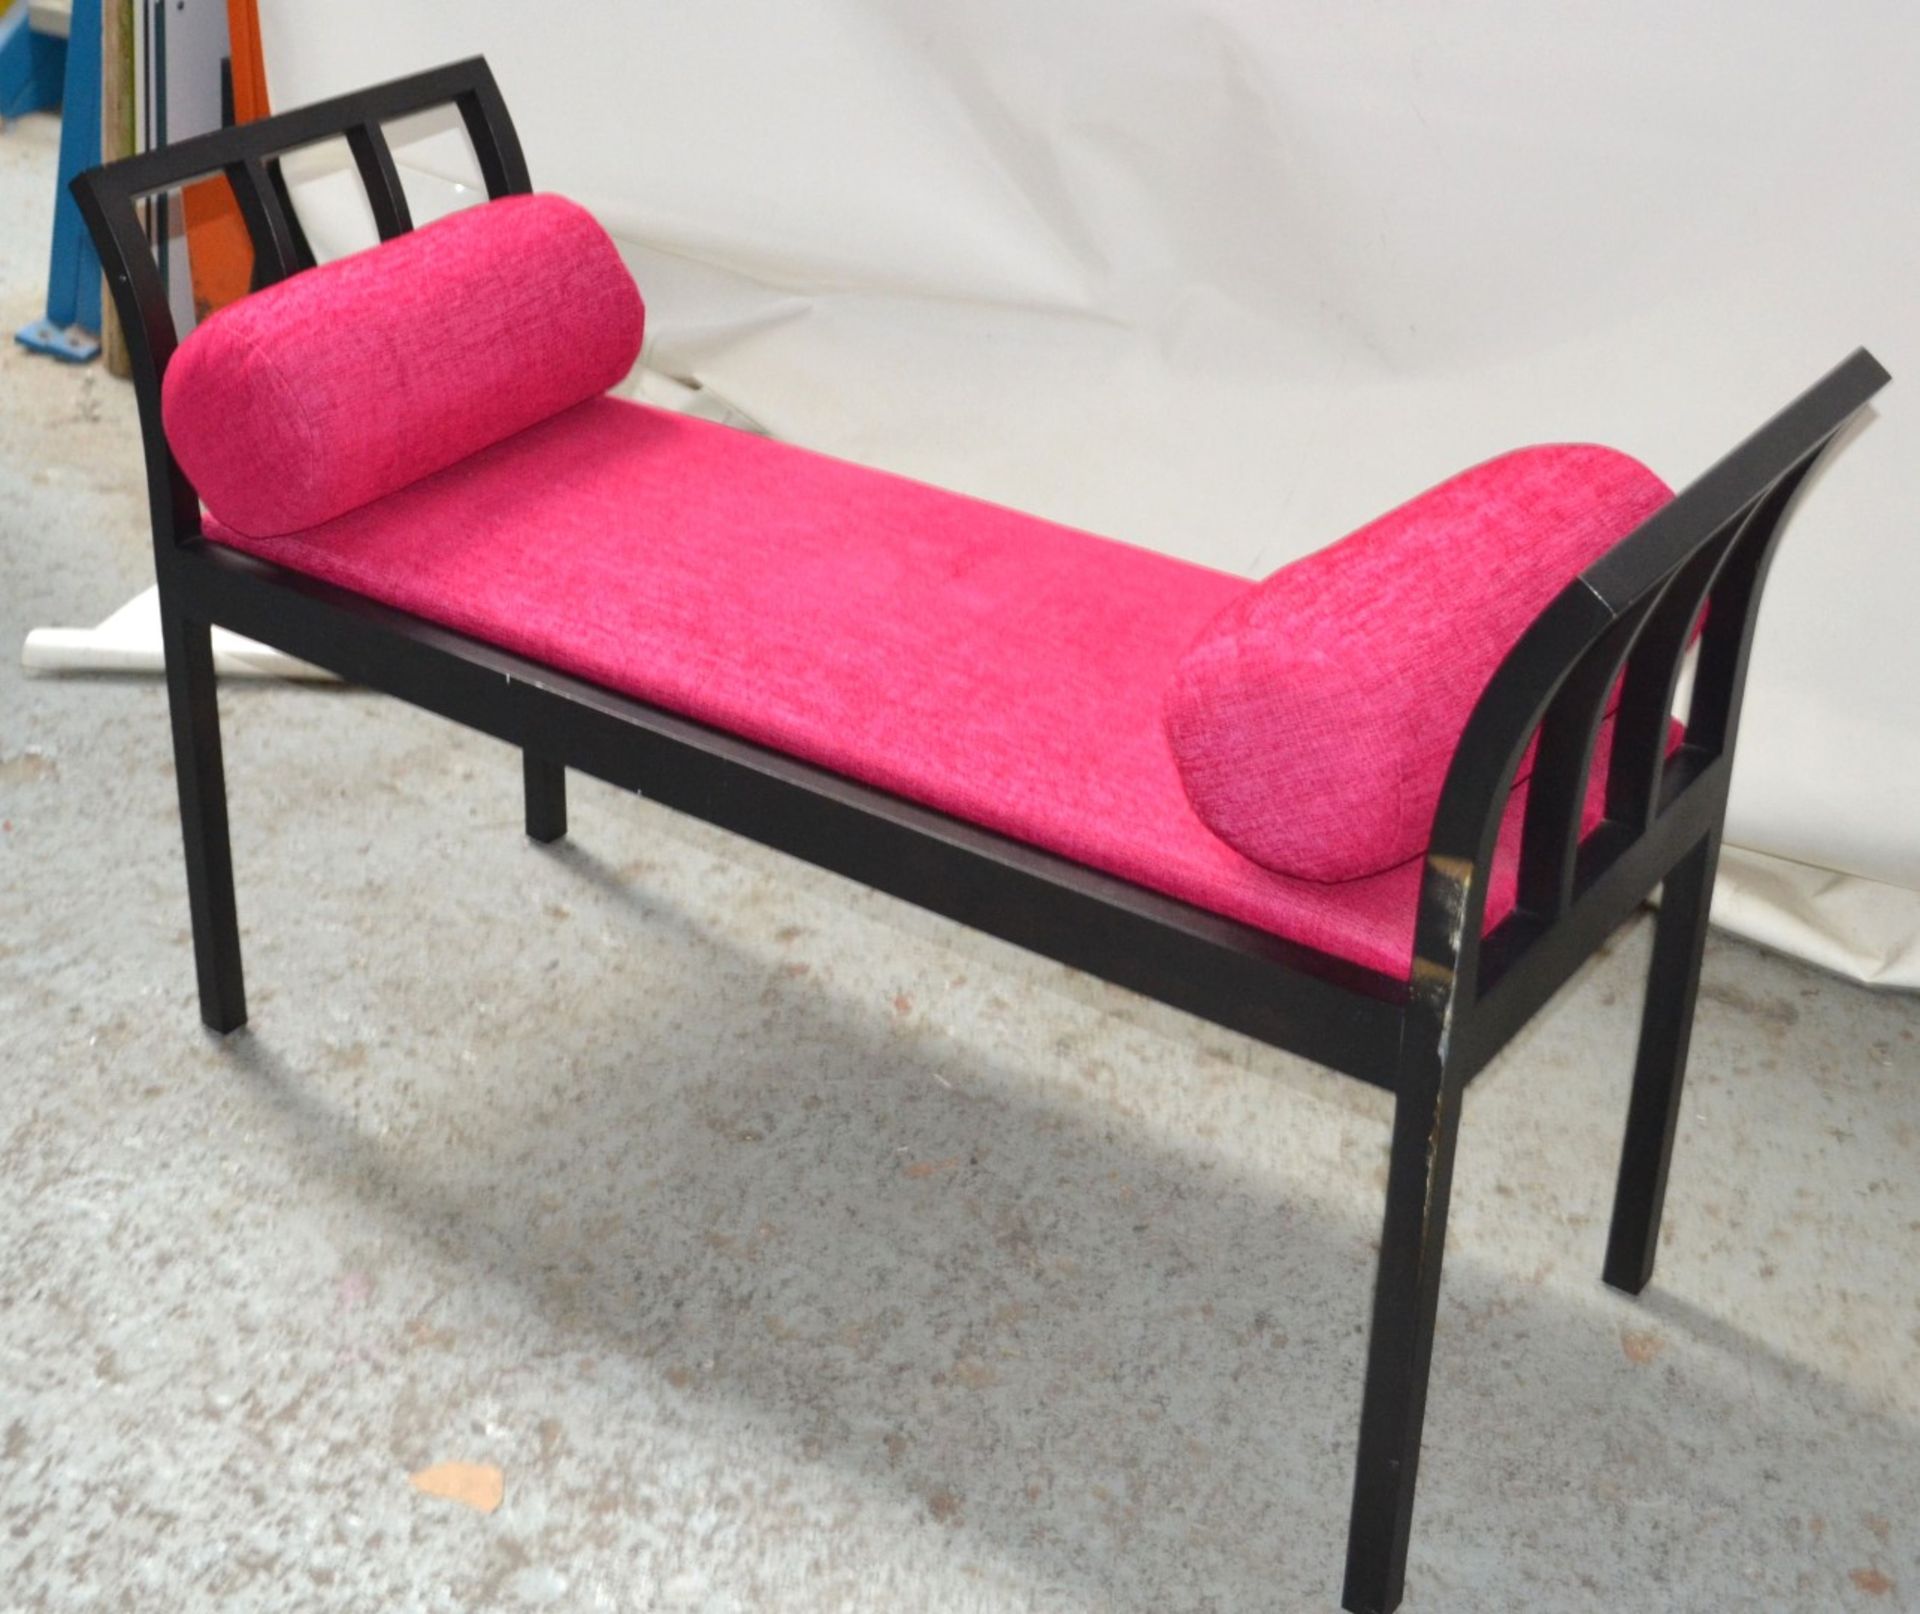 1 x Magenta Upholstered Bedroom Bench with 2 Cushions - CL314 - Location: Altrincham WA14 - *NO VAT - Image 7 of 11